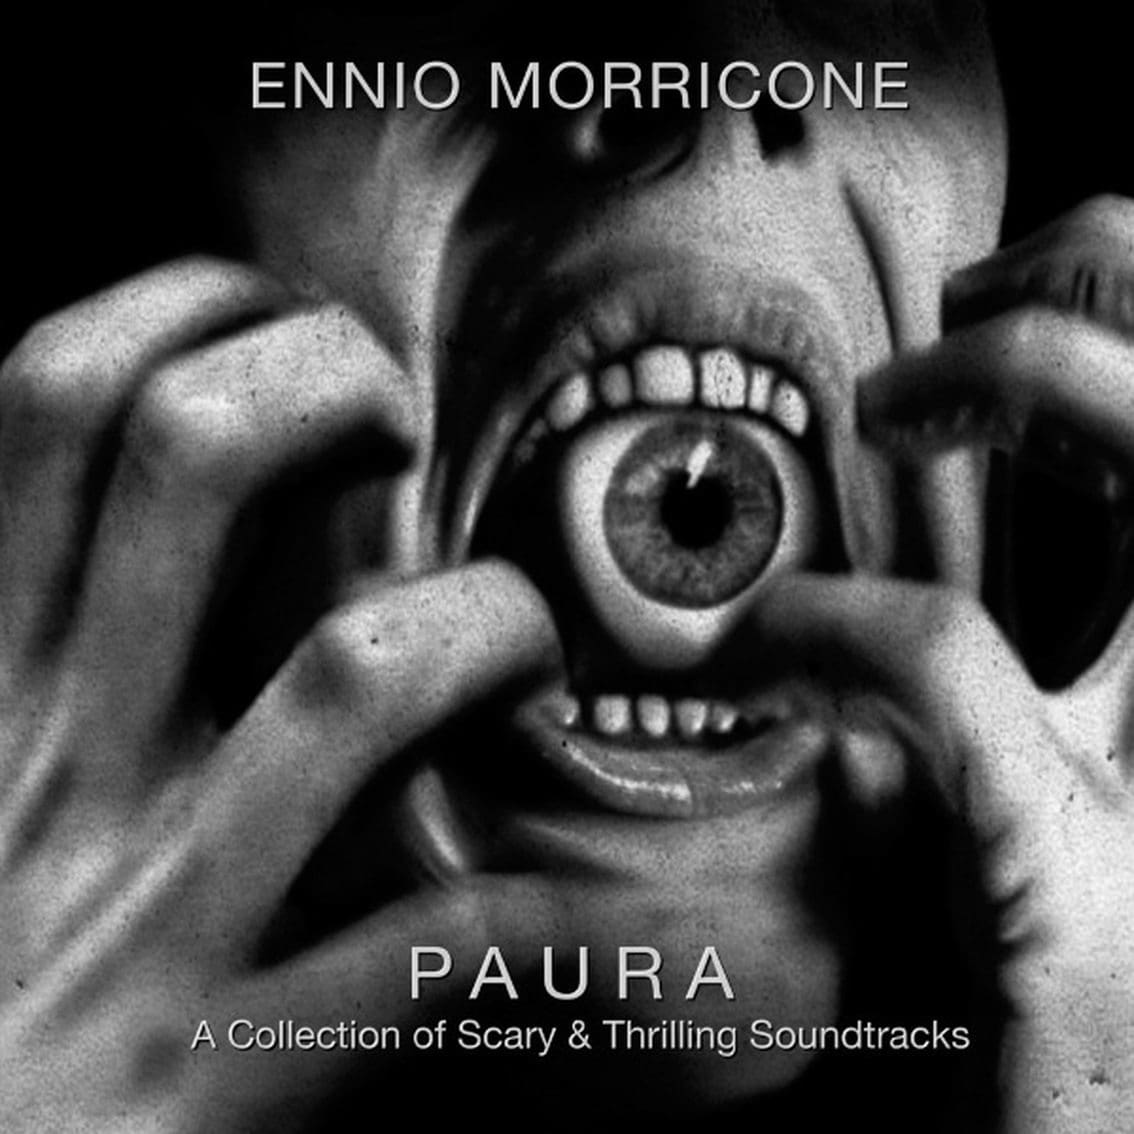 Ennio Morricone collection compiled on "Paura" CD (the first volume) and vinyl (the second volume)